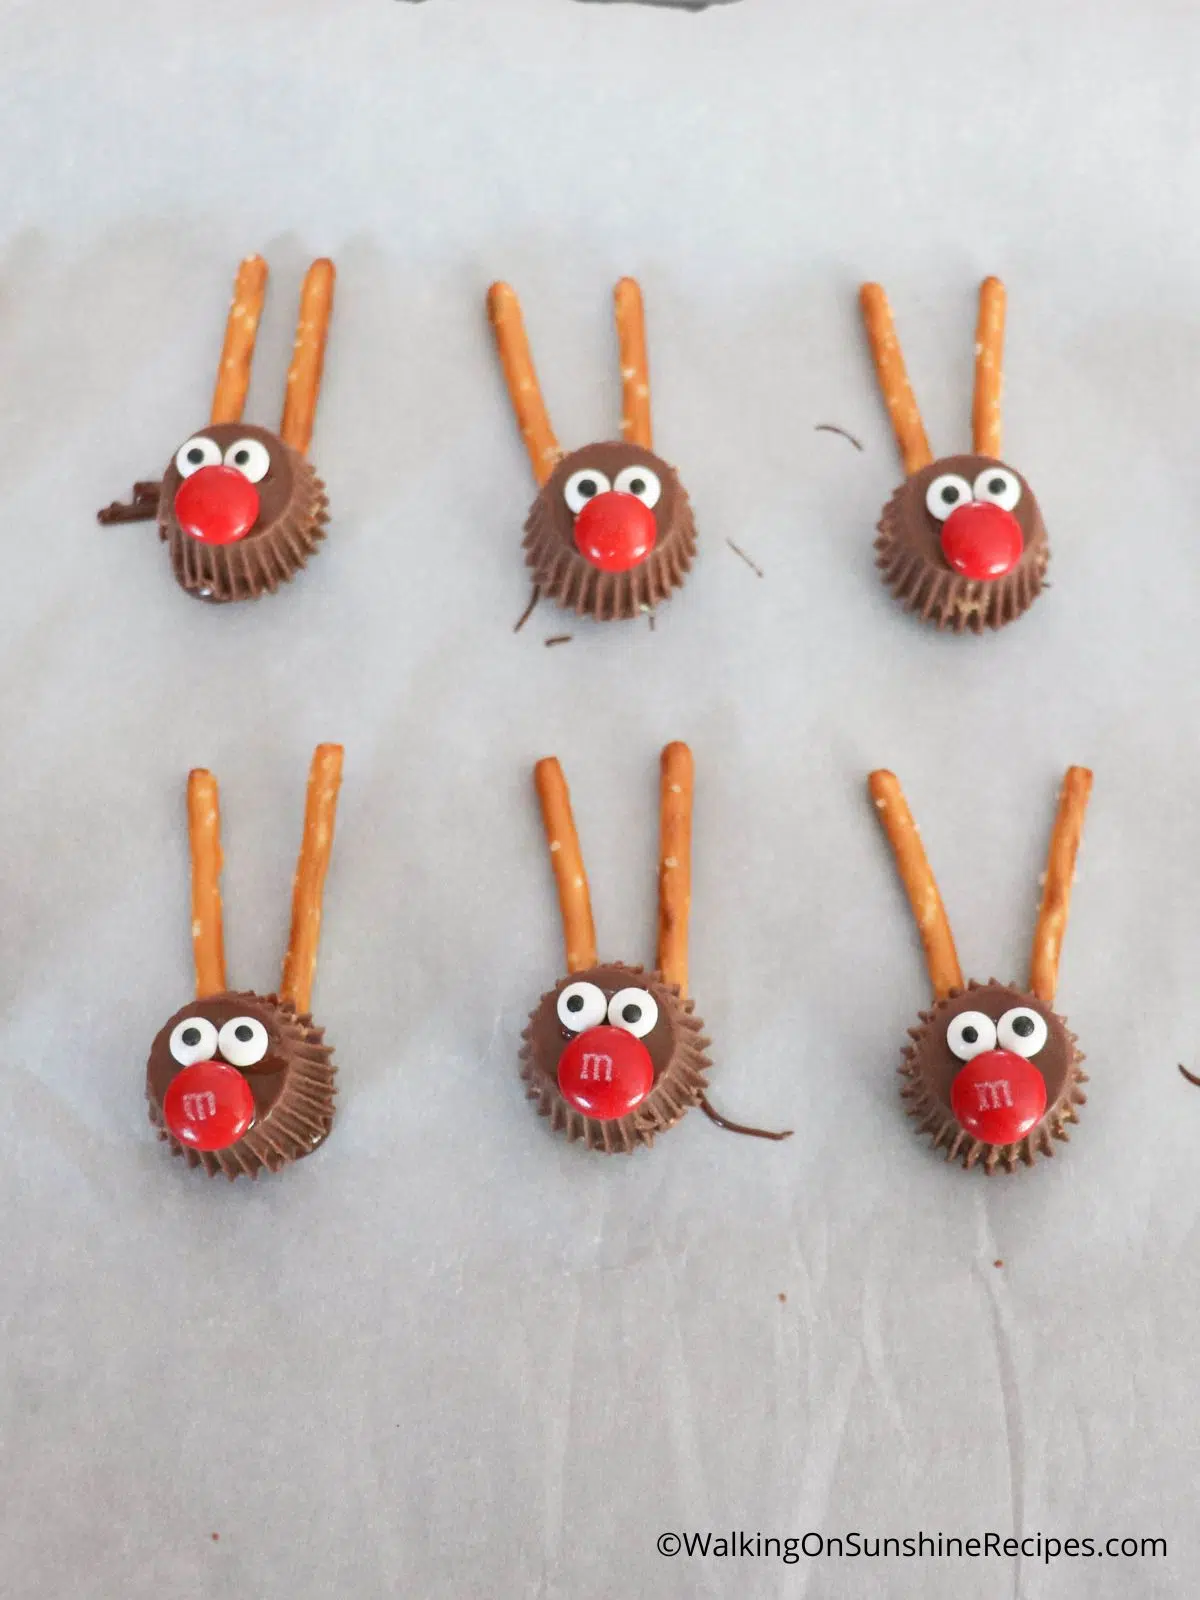 completed reindeer candy.